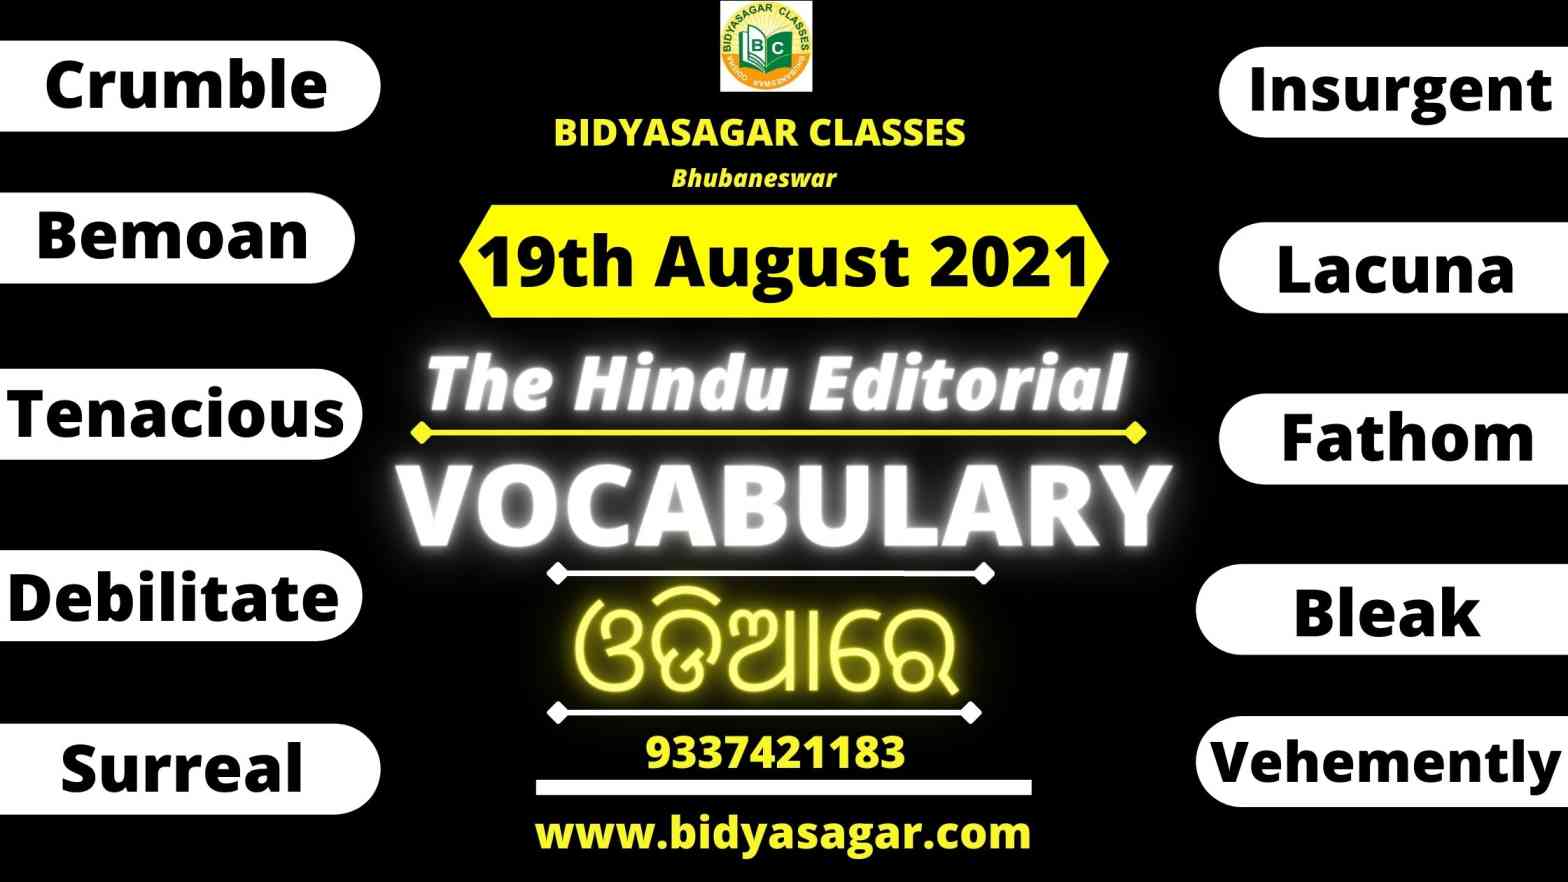 The Hindu Editorial Vocabulary of 19th August 2021